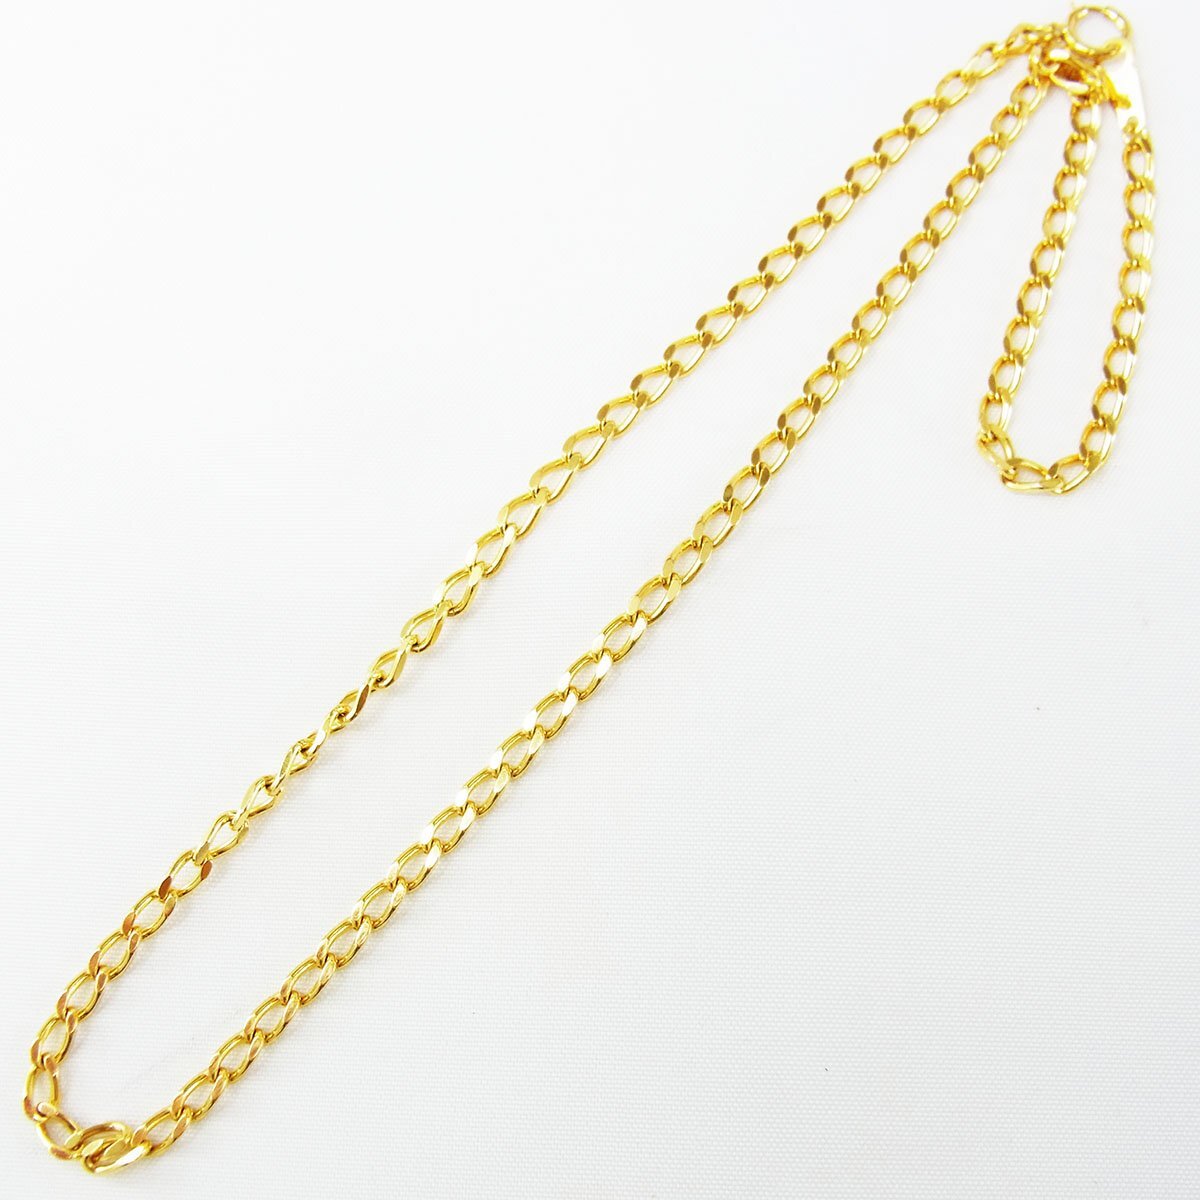 K18 chain necklace structure . department stamp approximately 12.2g total length : approximately 40.5cm width : approximately 2.9mm Gold #